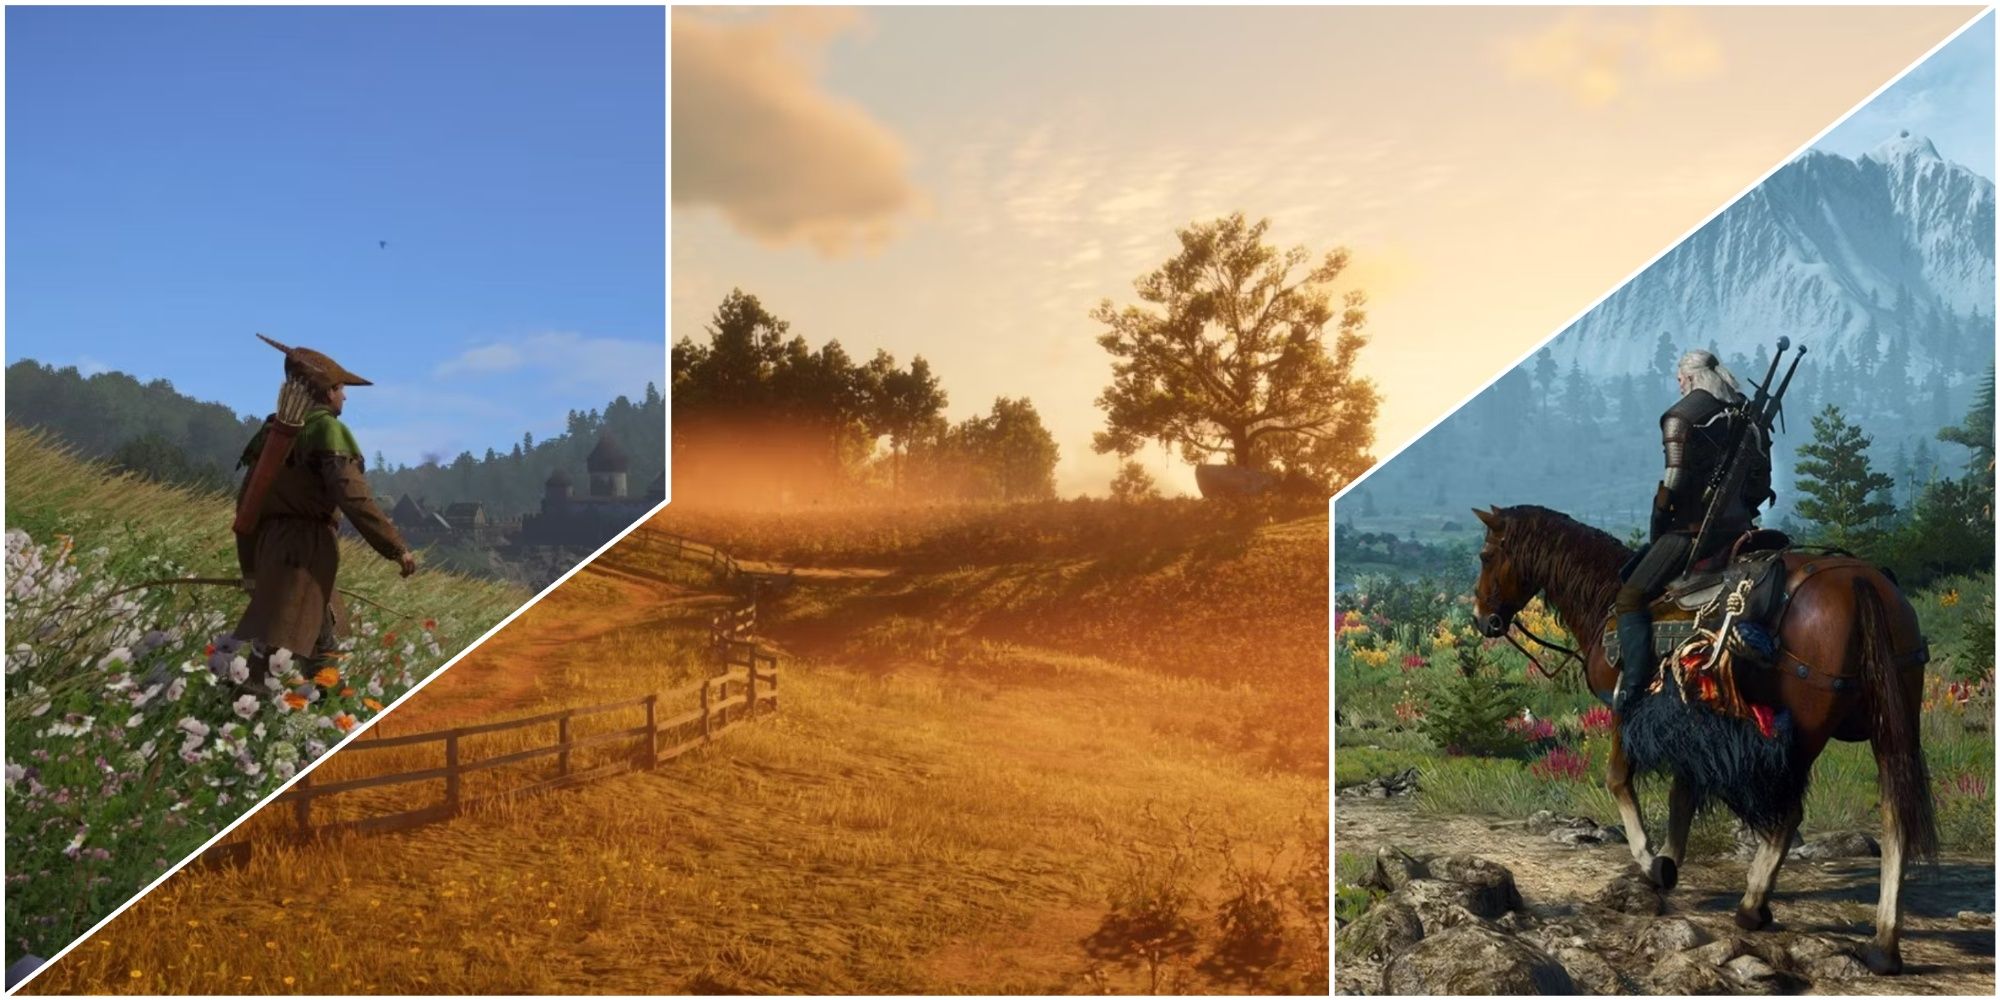 5 Open-World Games with Realistic Rural Environments